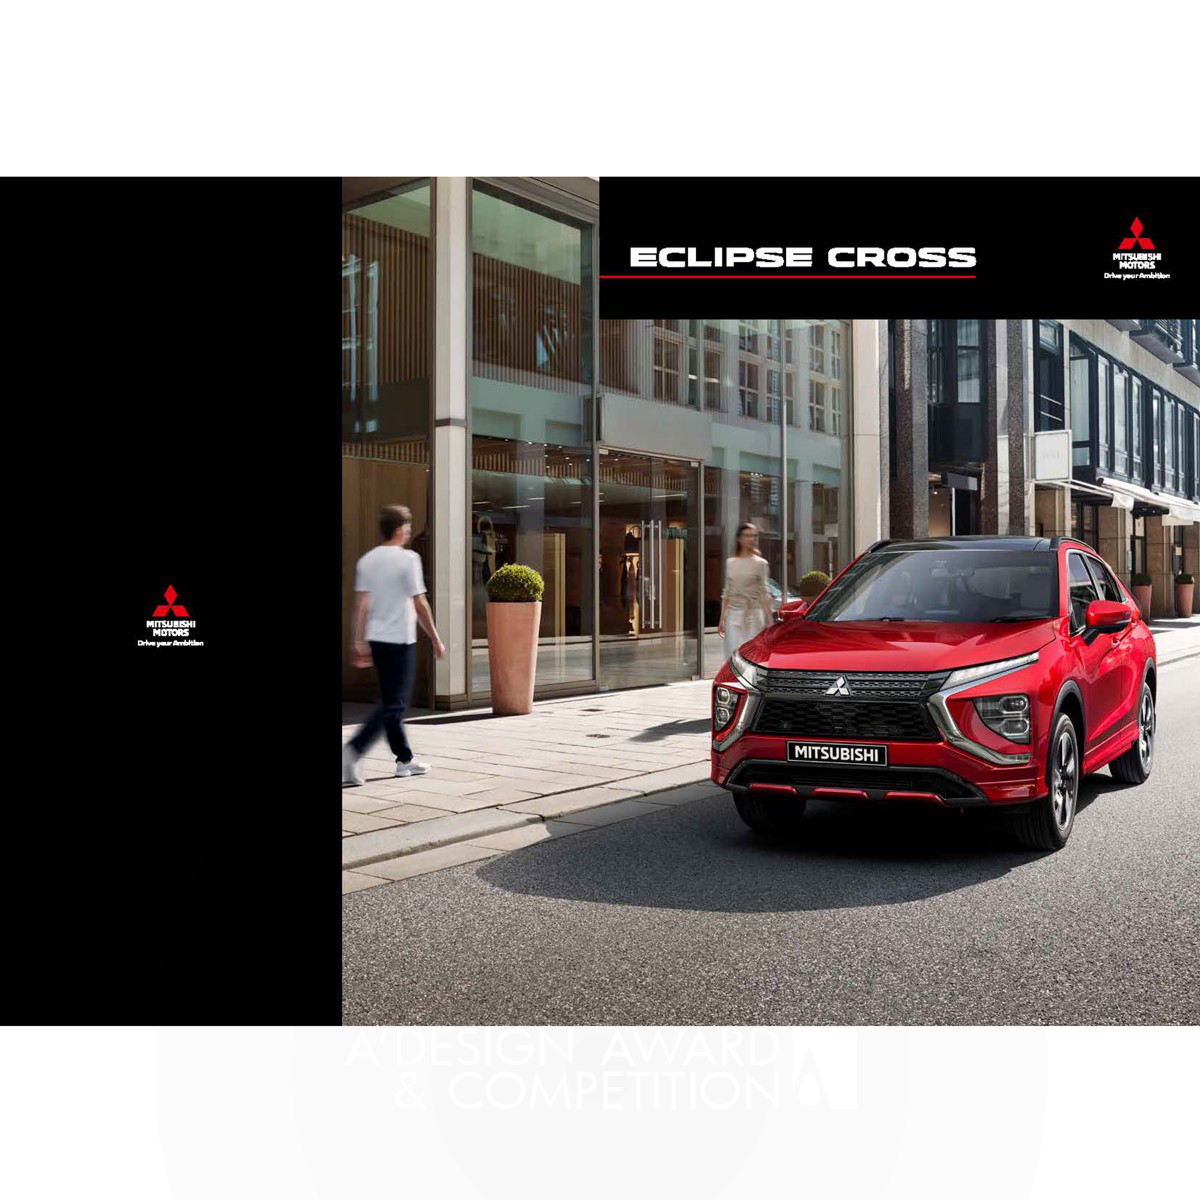 Mitsubishi Motors Eclipse Cross Brochures of Car Products and Functions by Noriko Hirai Silver Advertising, Marketing and Communication Design Award Winner 2021 